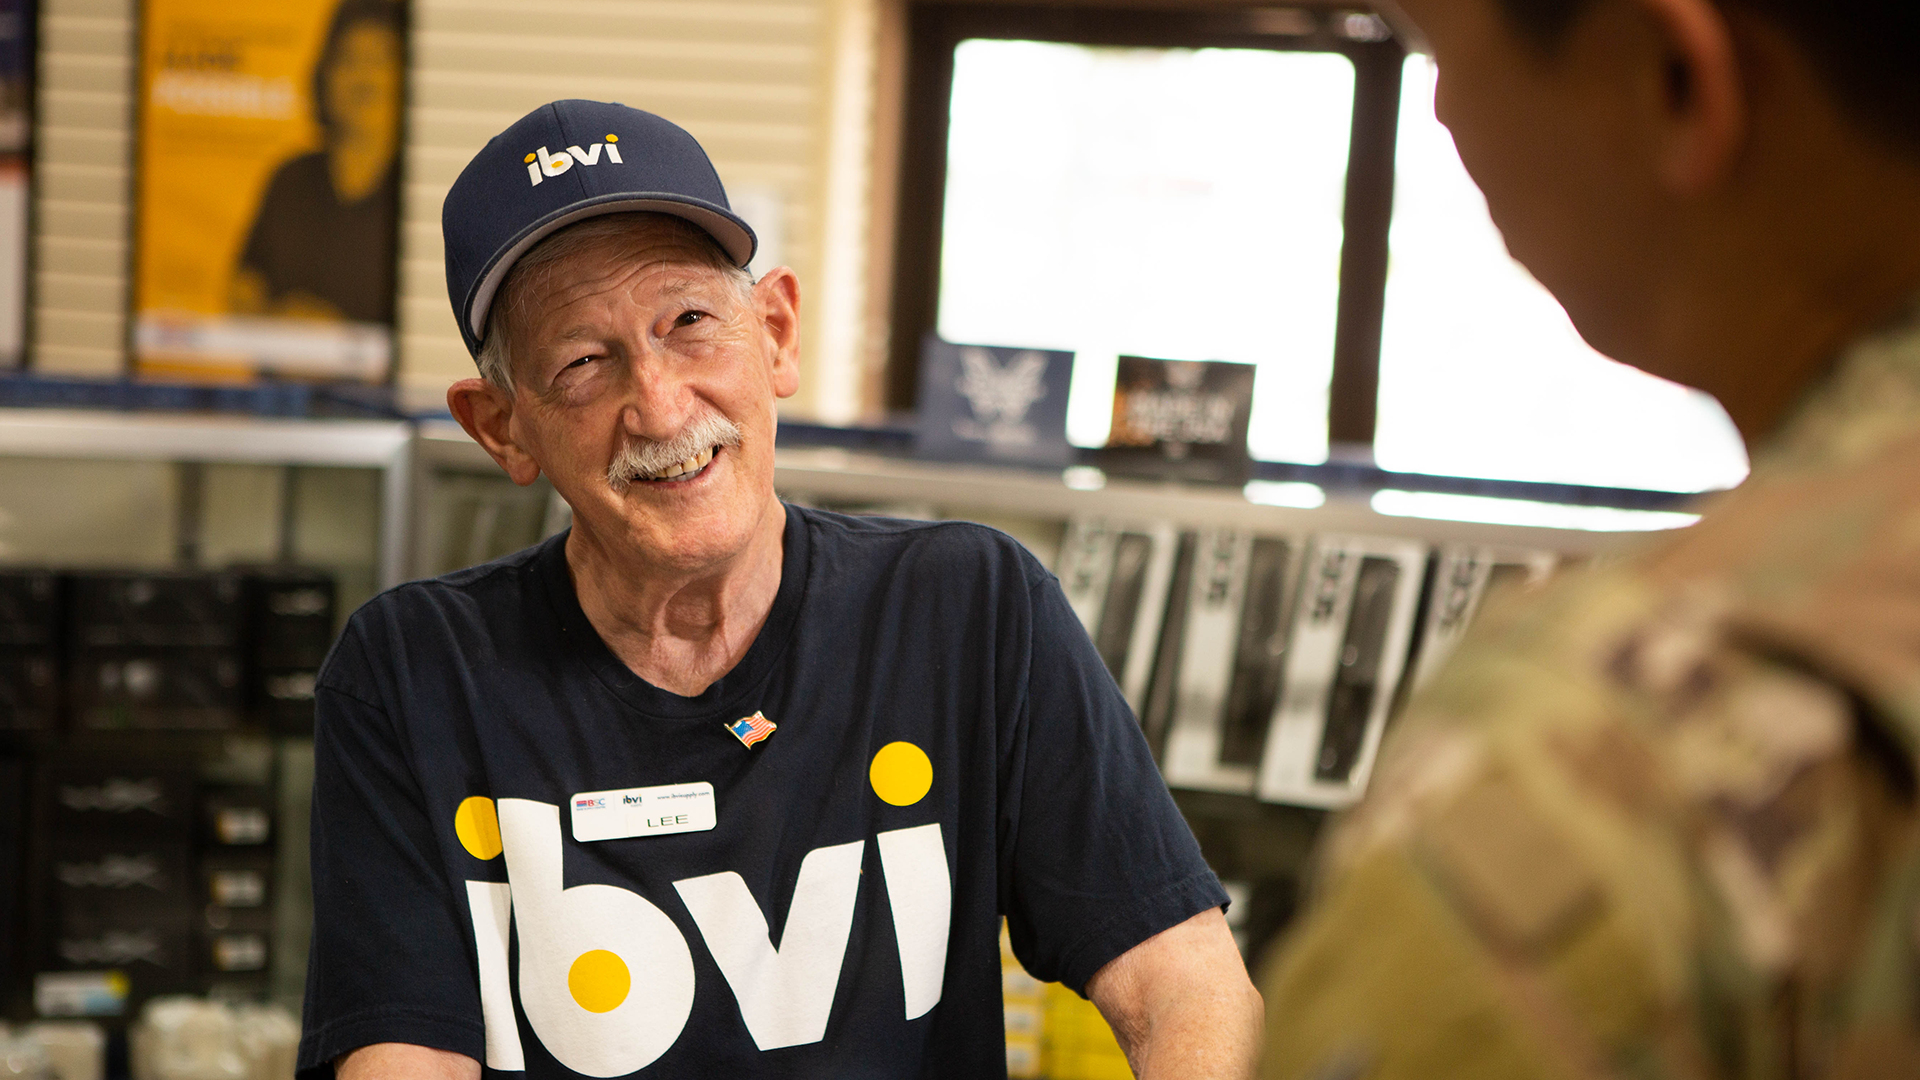 Elderly man wearing a blue IBVI shirt and hat. He has a nametag on his shirt that says “LEE” and a United States flag pin. He is assisting military personnel in a store.